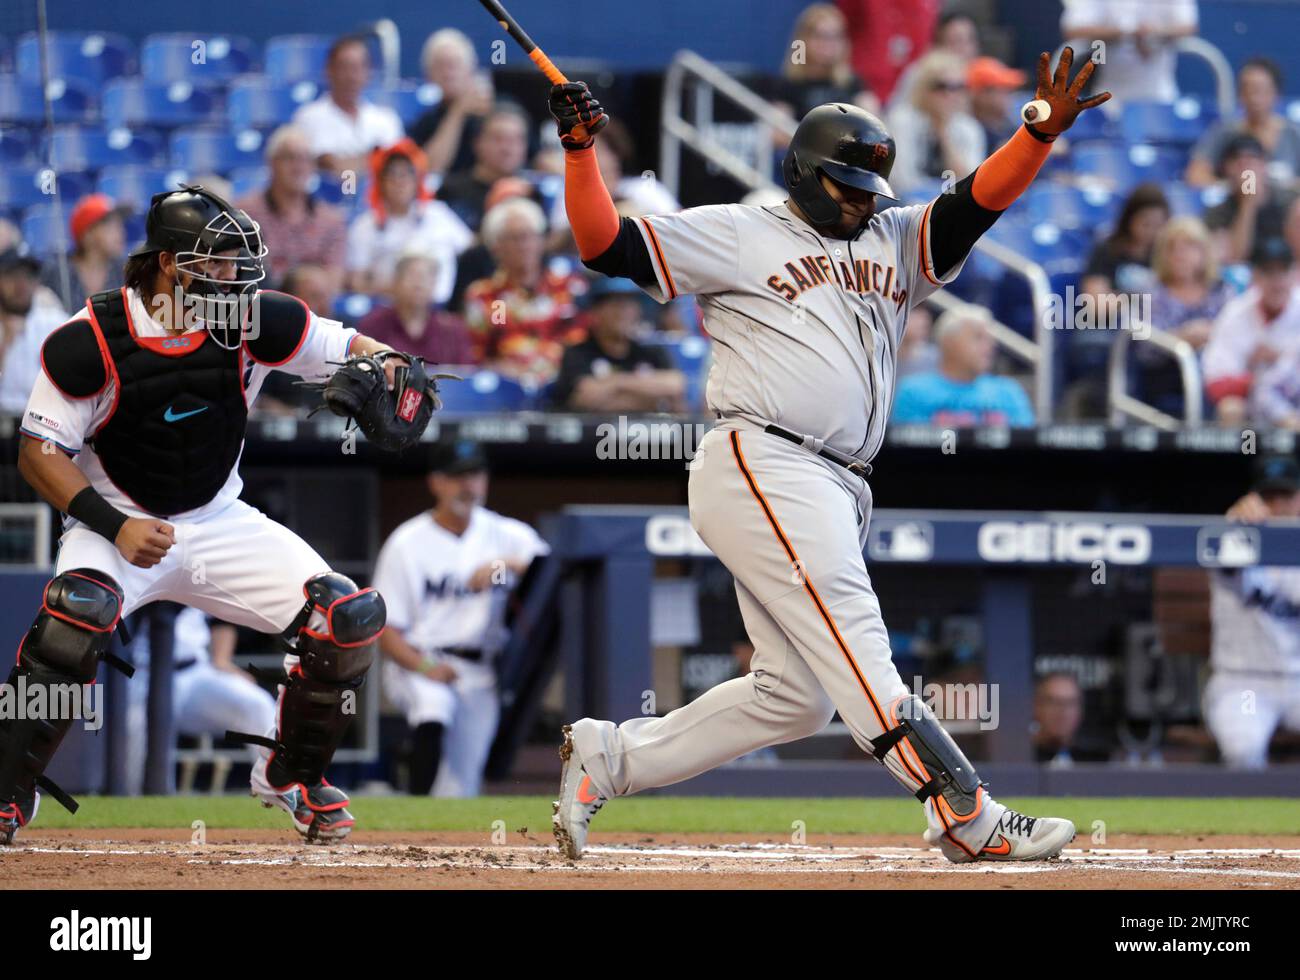 San Francisco Giants' Pablo Sandoval, right, strikes out during the first  inning of the team's baseball game against the Miami Marlins, Wednesday,  May 29, 2019, in Miami. At left is Marlins catcher